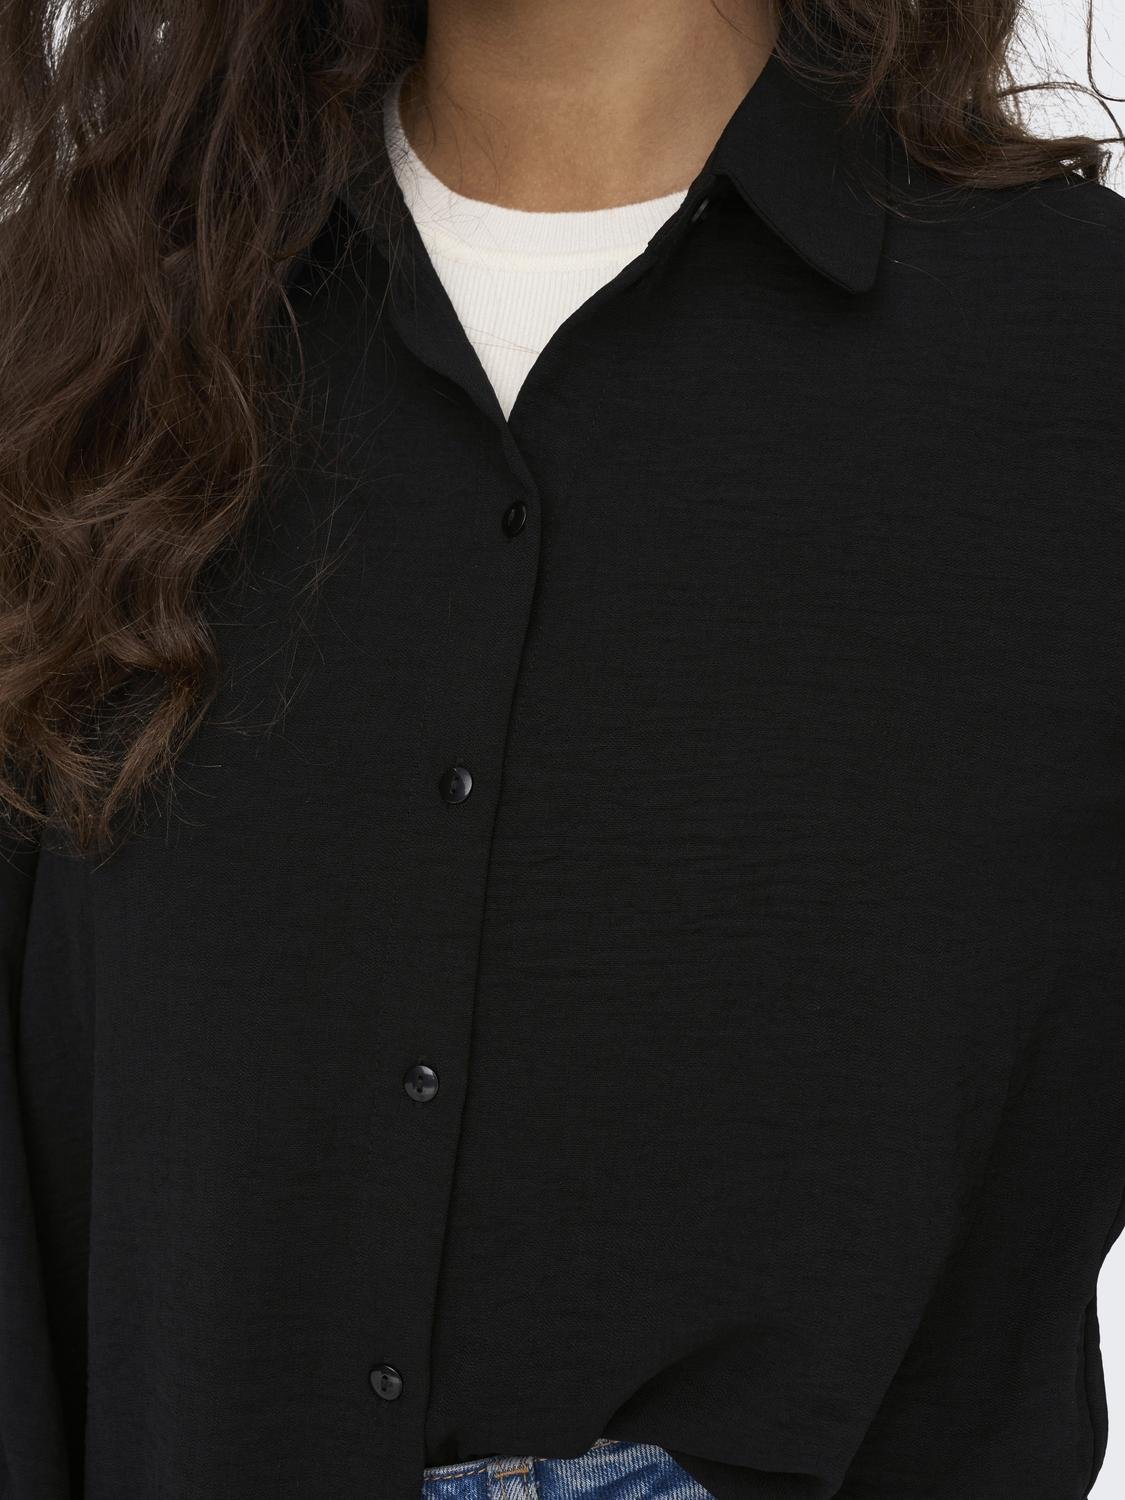 ONLY Shirt with volume sleeves -Black - 15283183